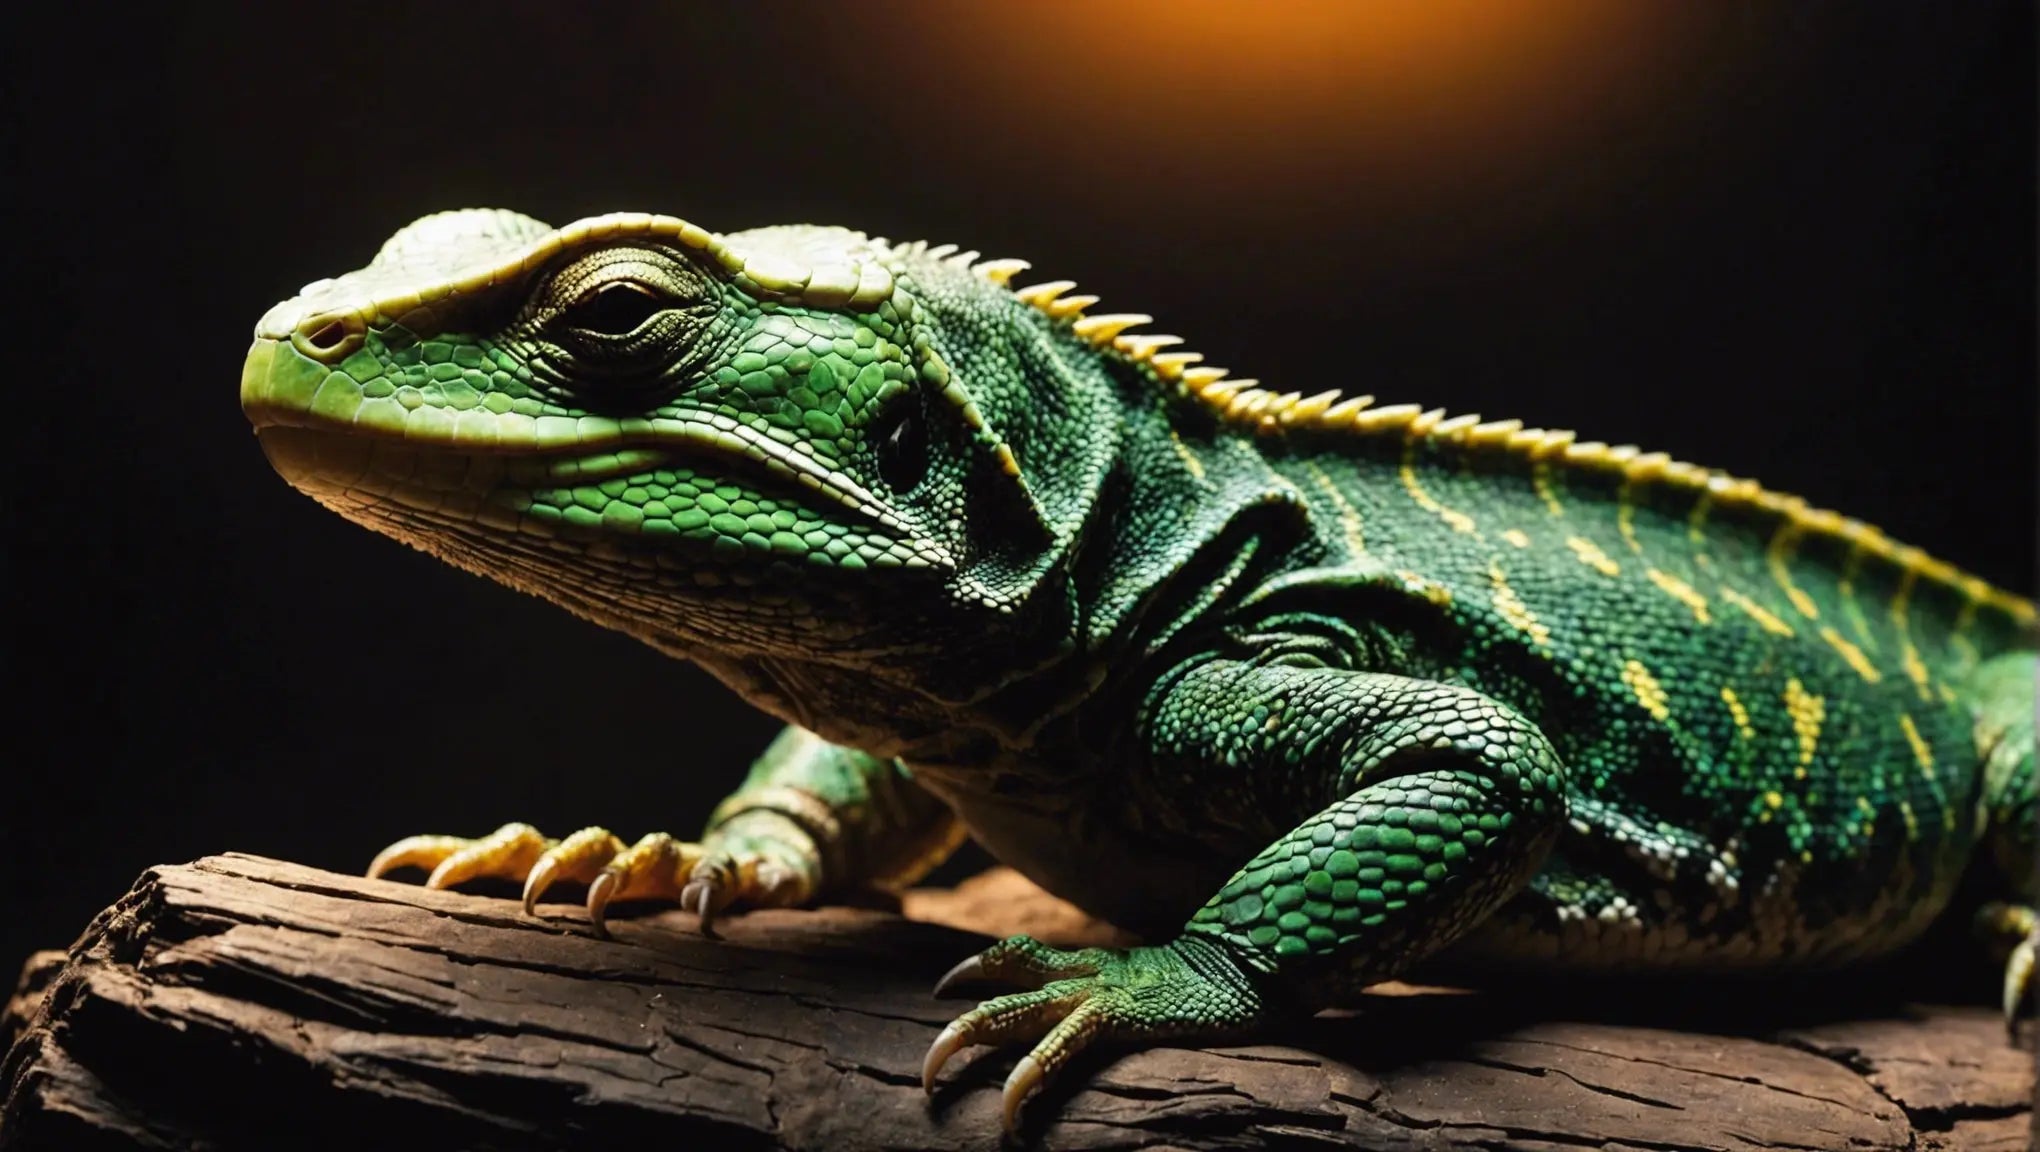 Get the Perfect Lighting Solution for Your Reptile: Arcadia D3 Bulb